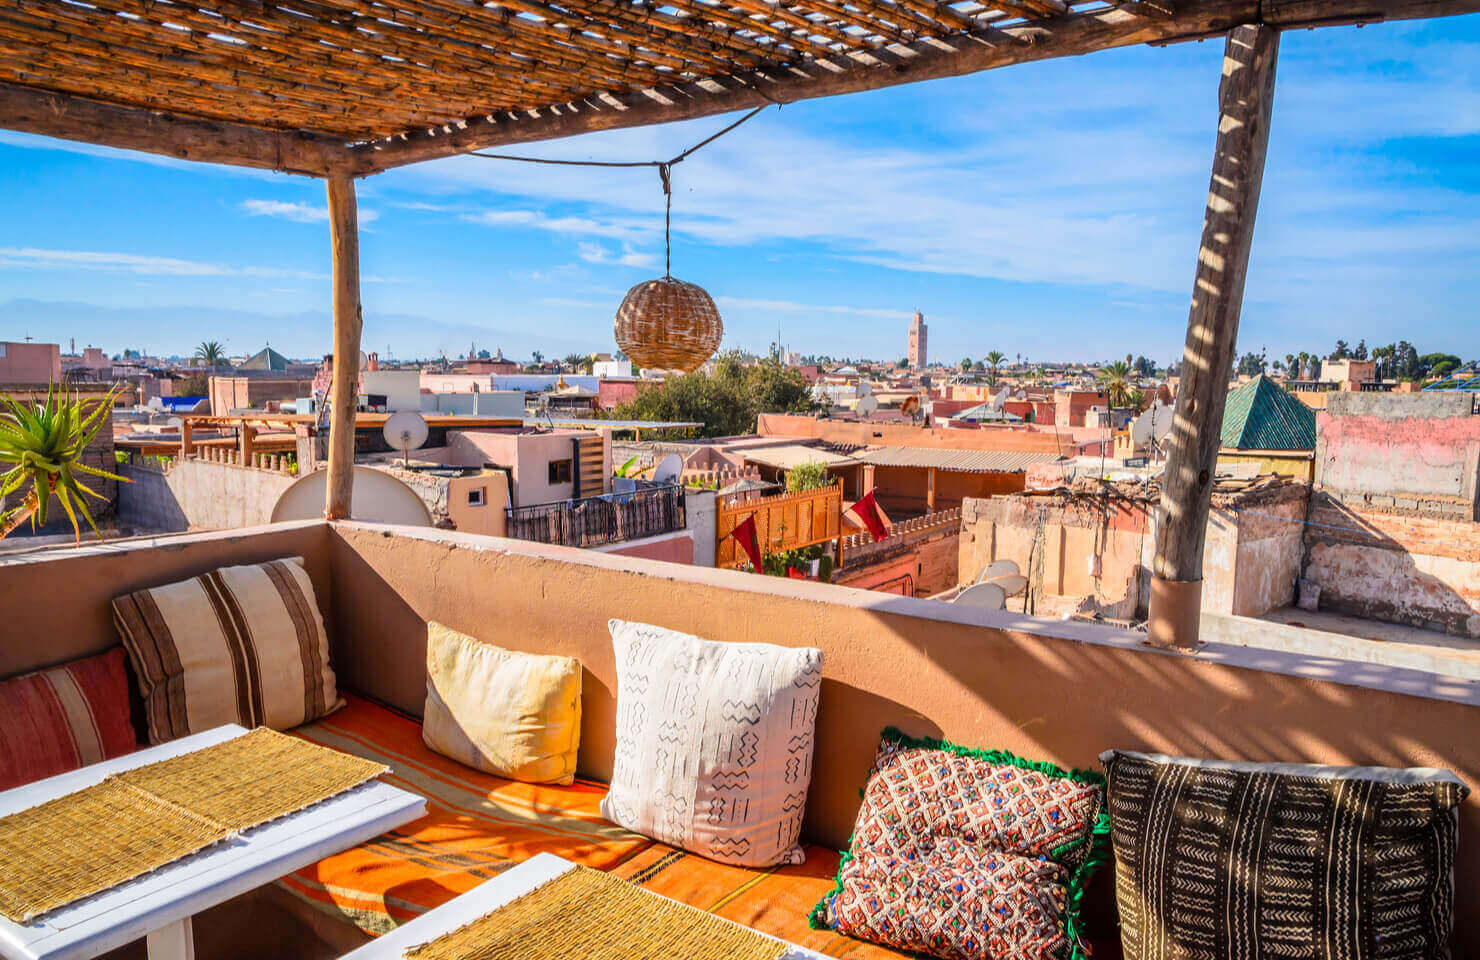 View over the roofs of Marrakech from a terrace